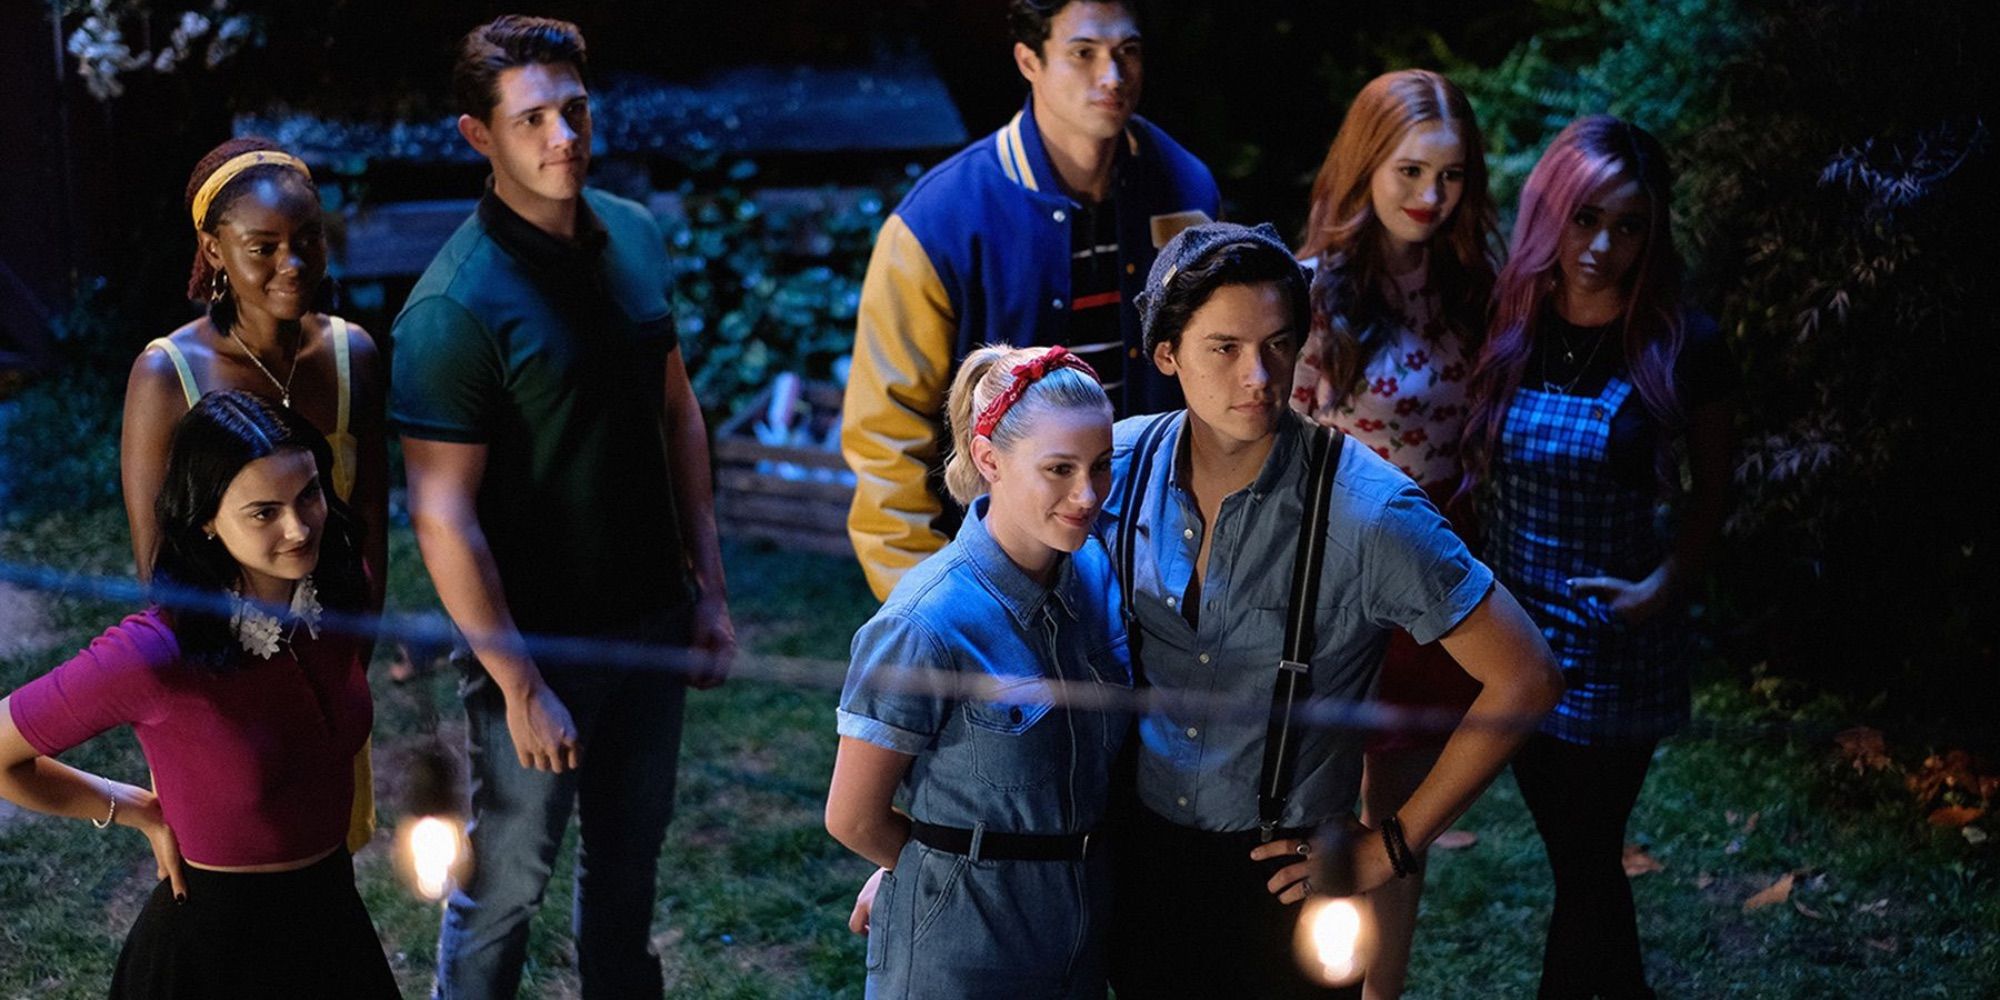 The cast of Riverdale standing in a field at night